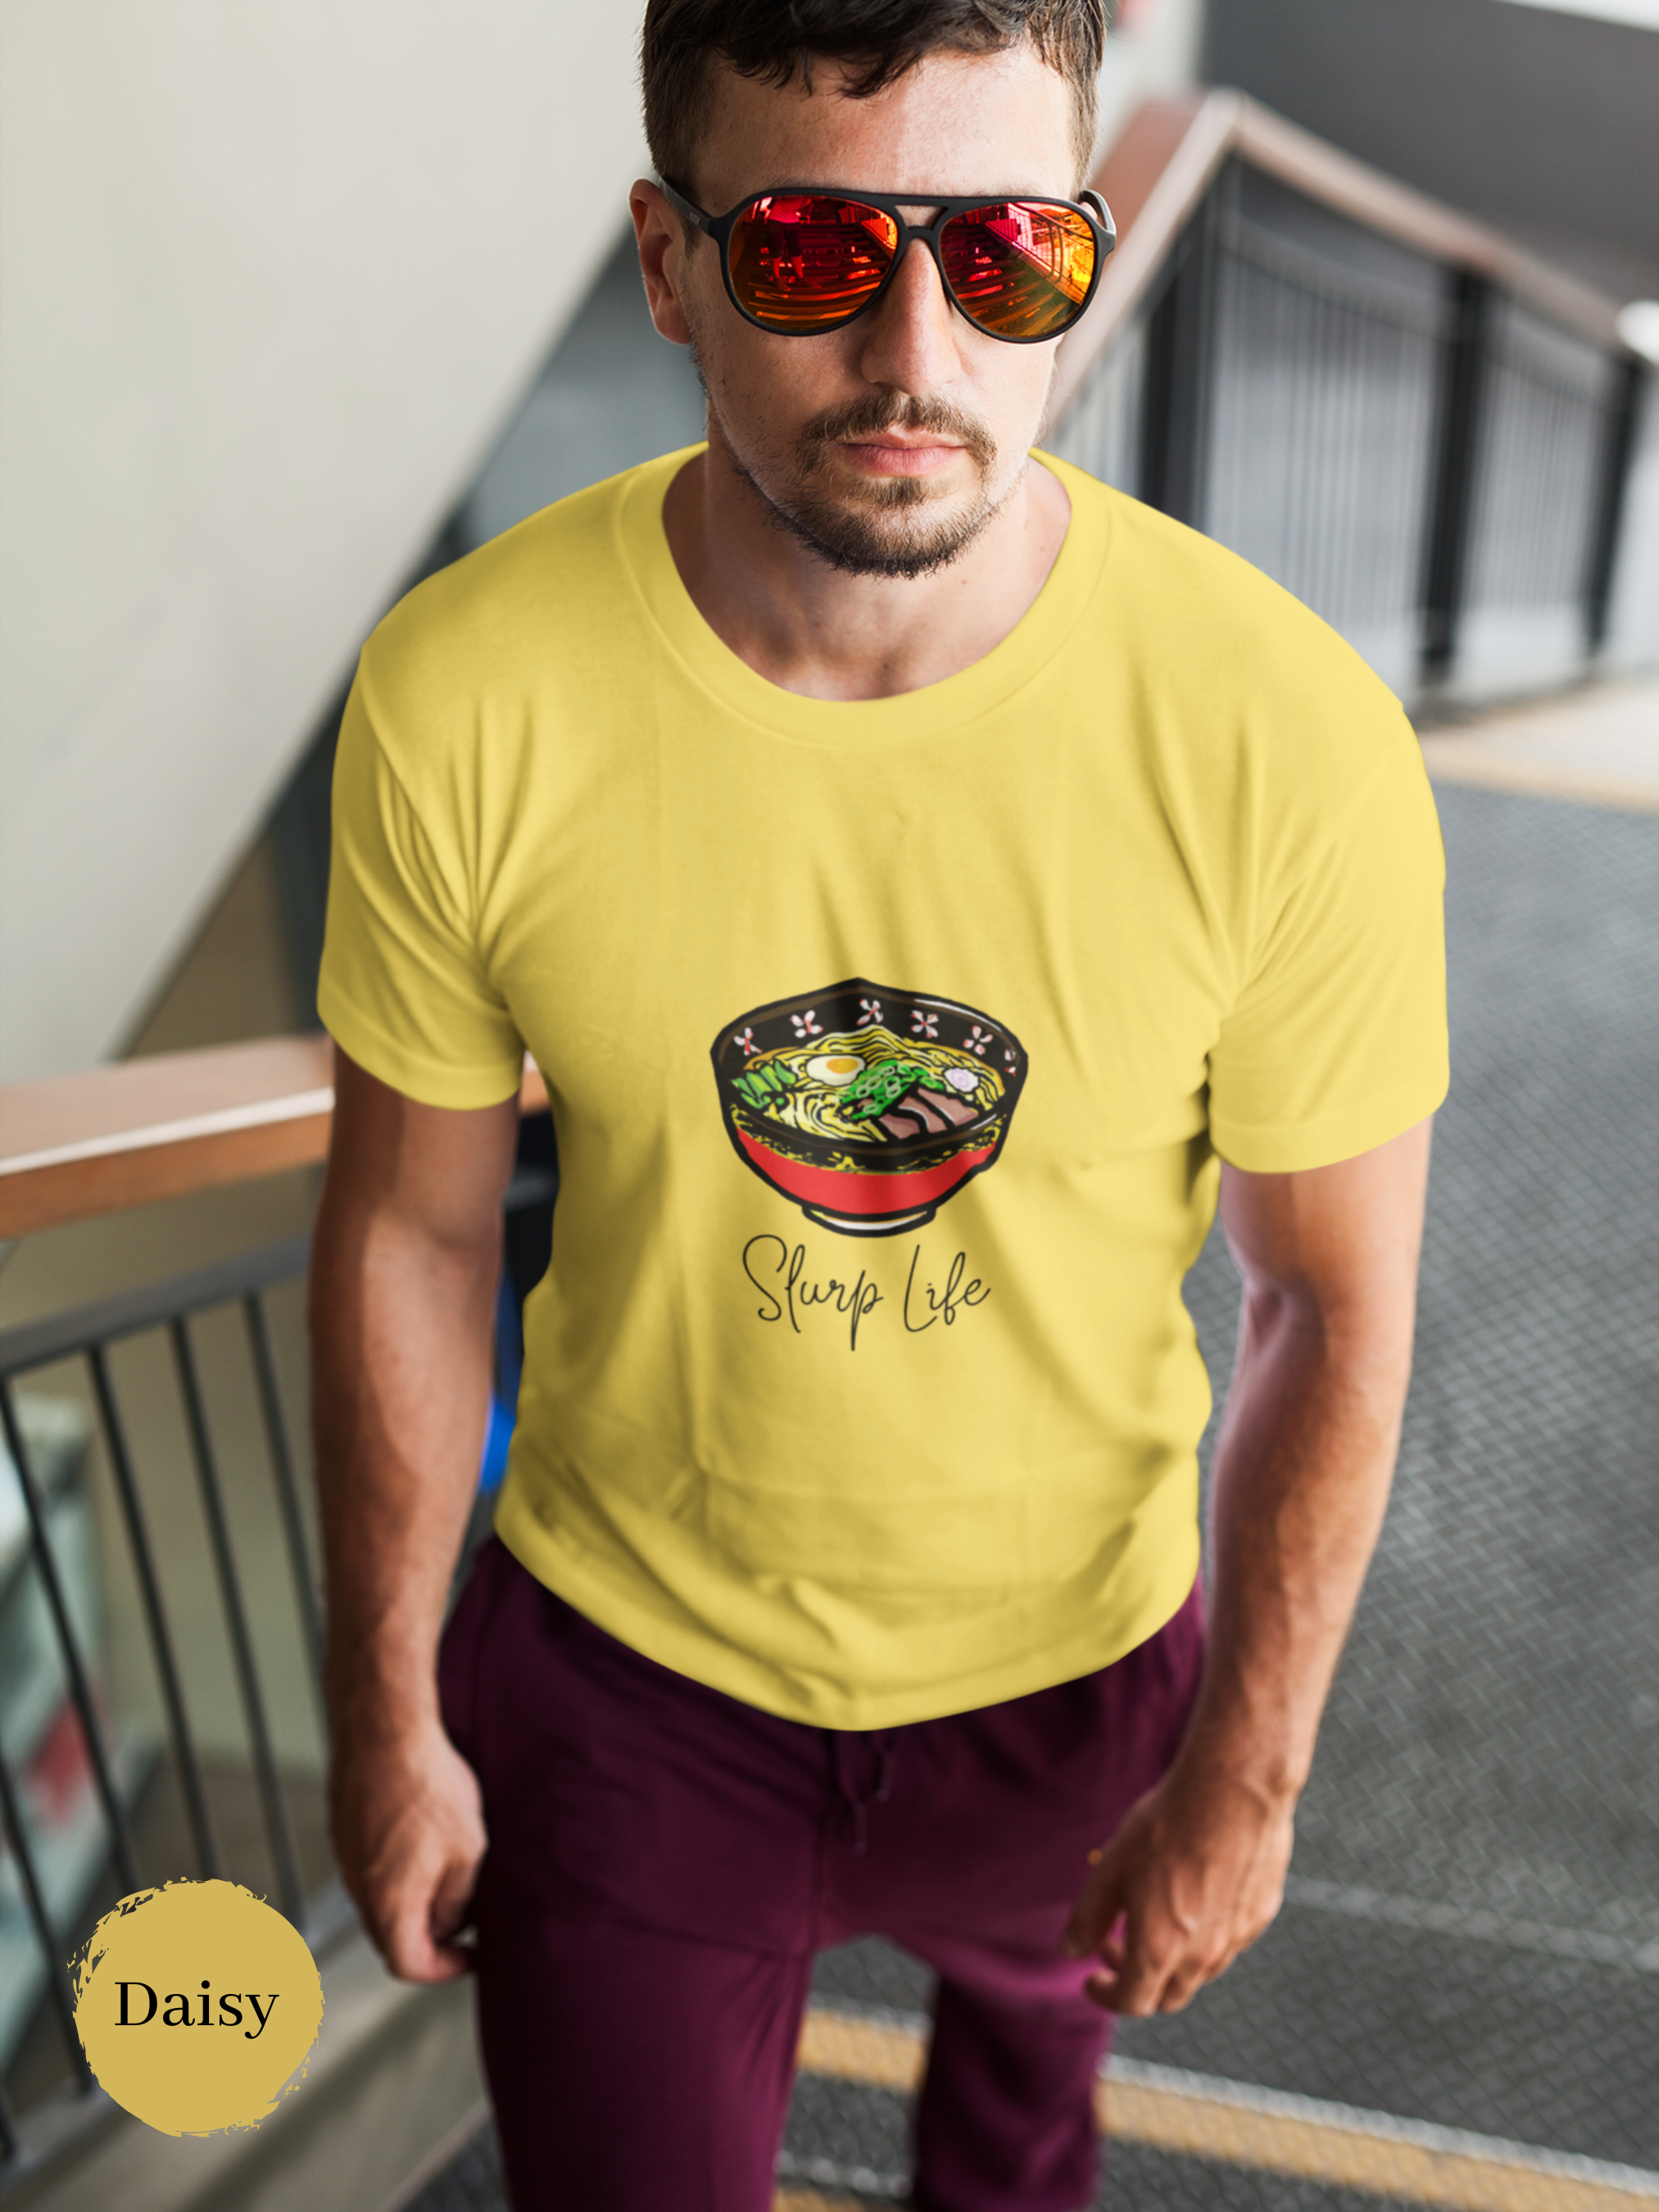 Ramen T-Shirt - Slurp Life in Style with Japanese Foodie Shirt and Ramen Art